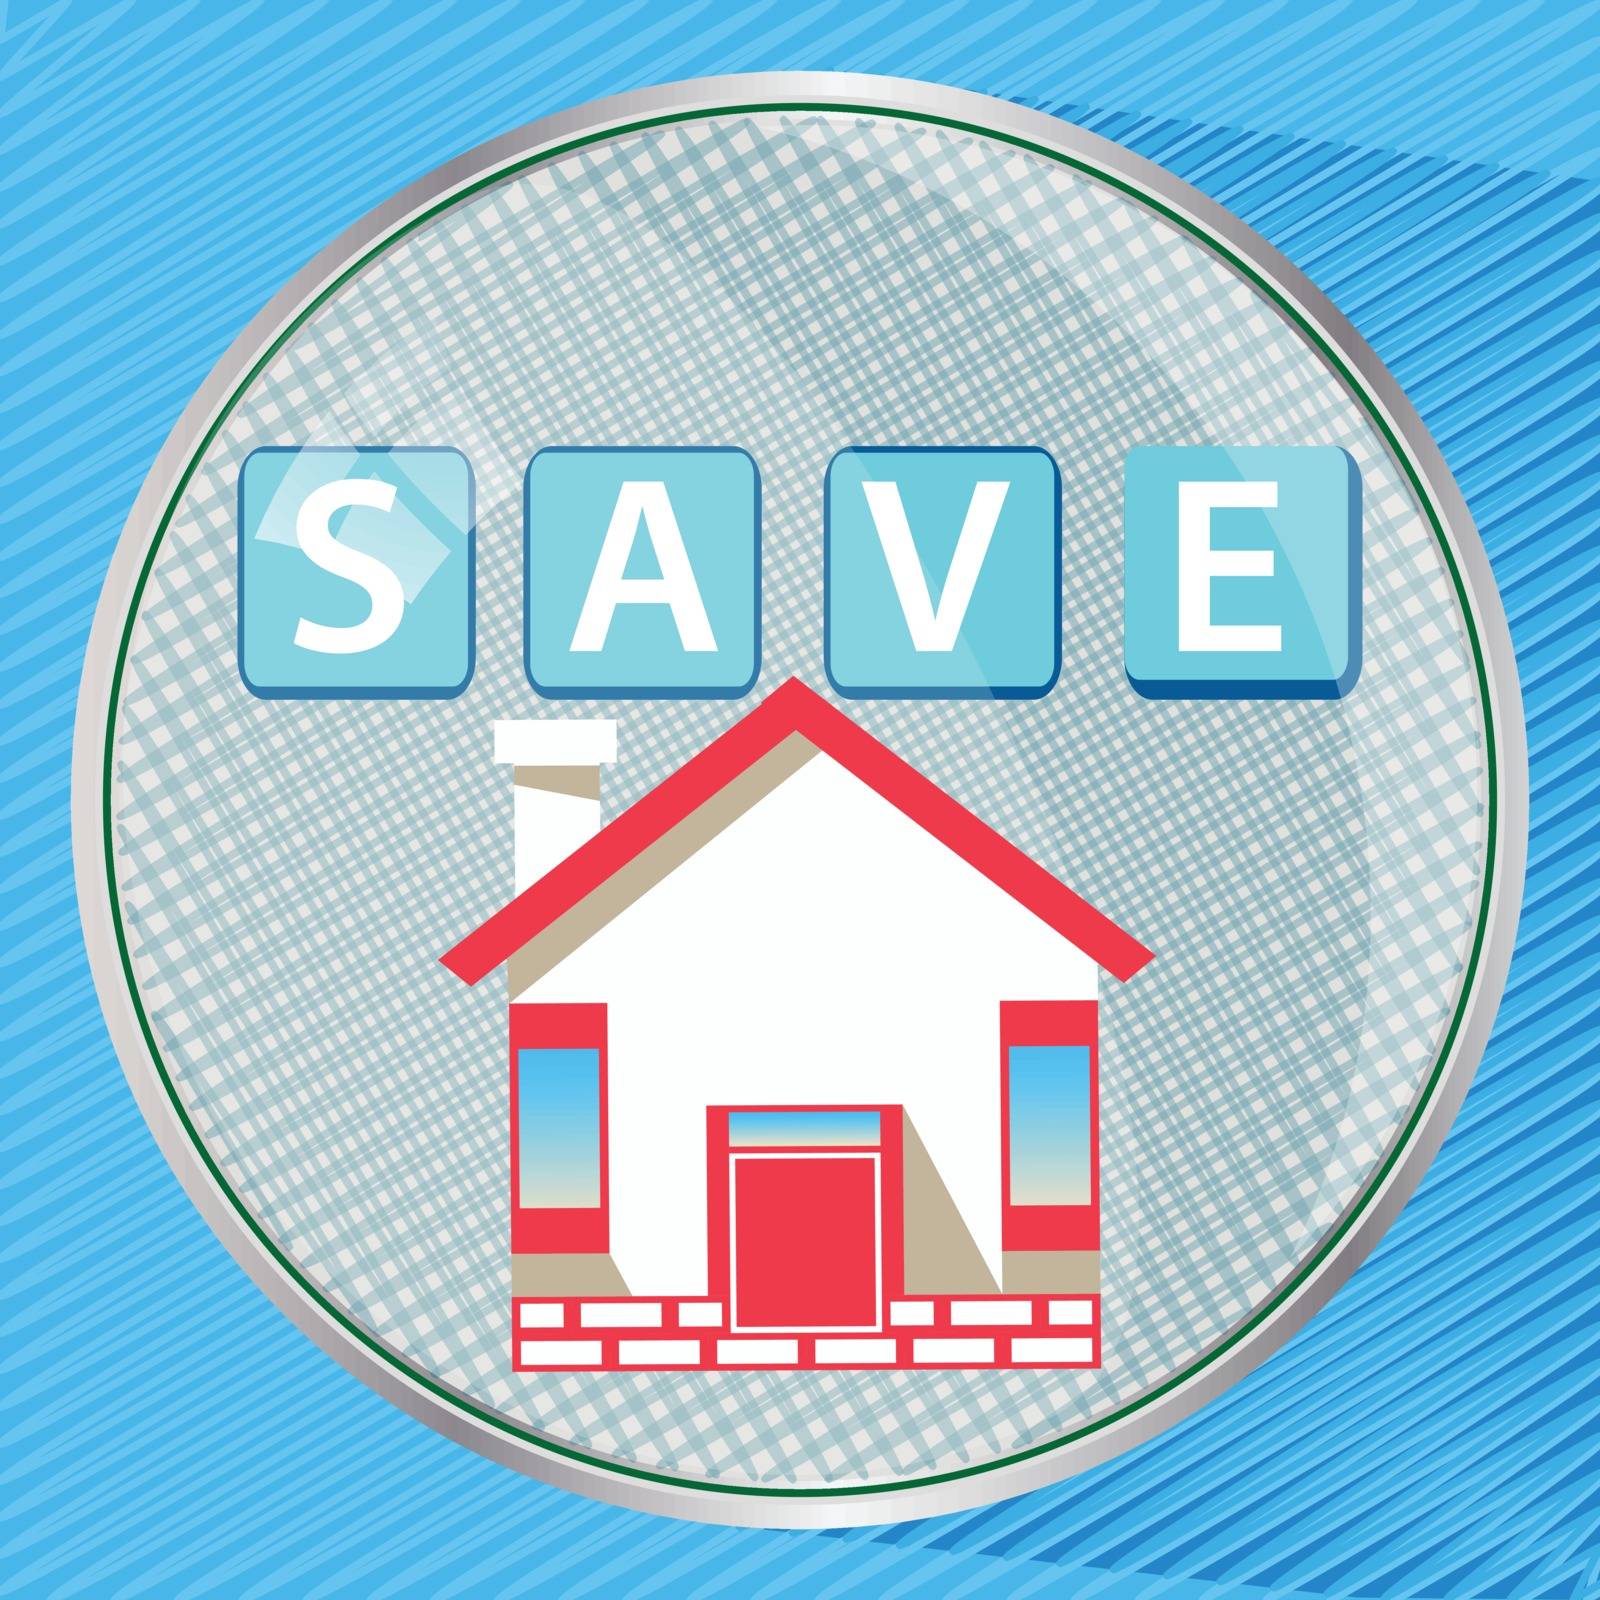 Save to save to insure the house. Round button. illustration for your design.